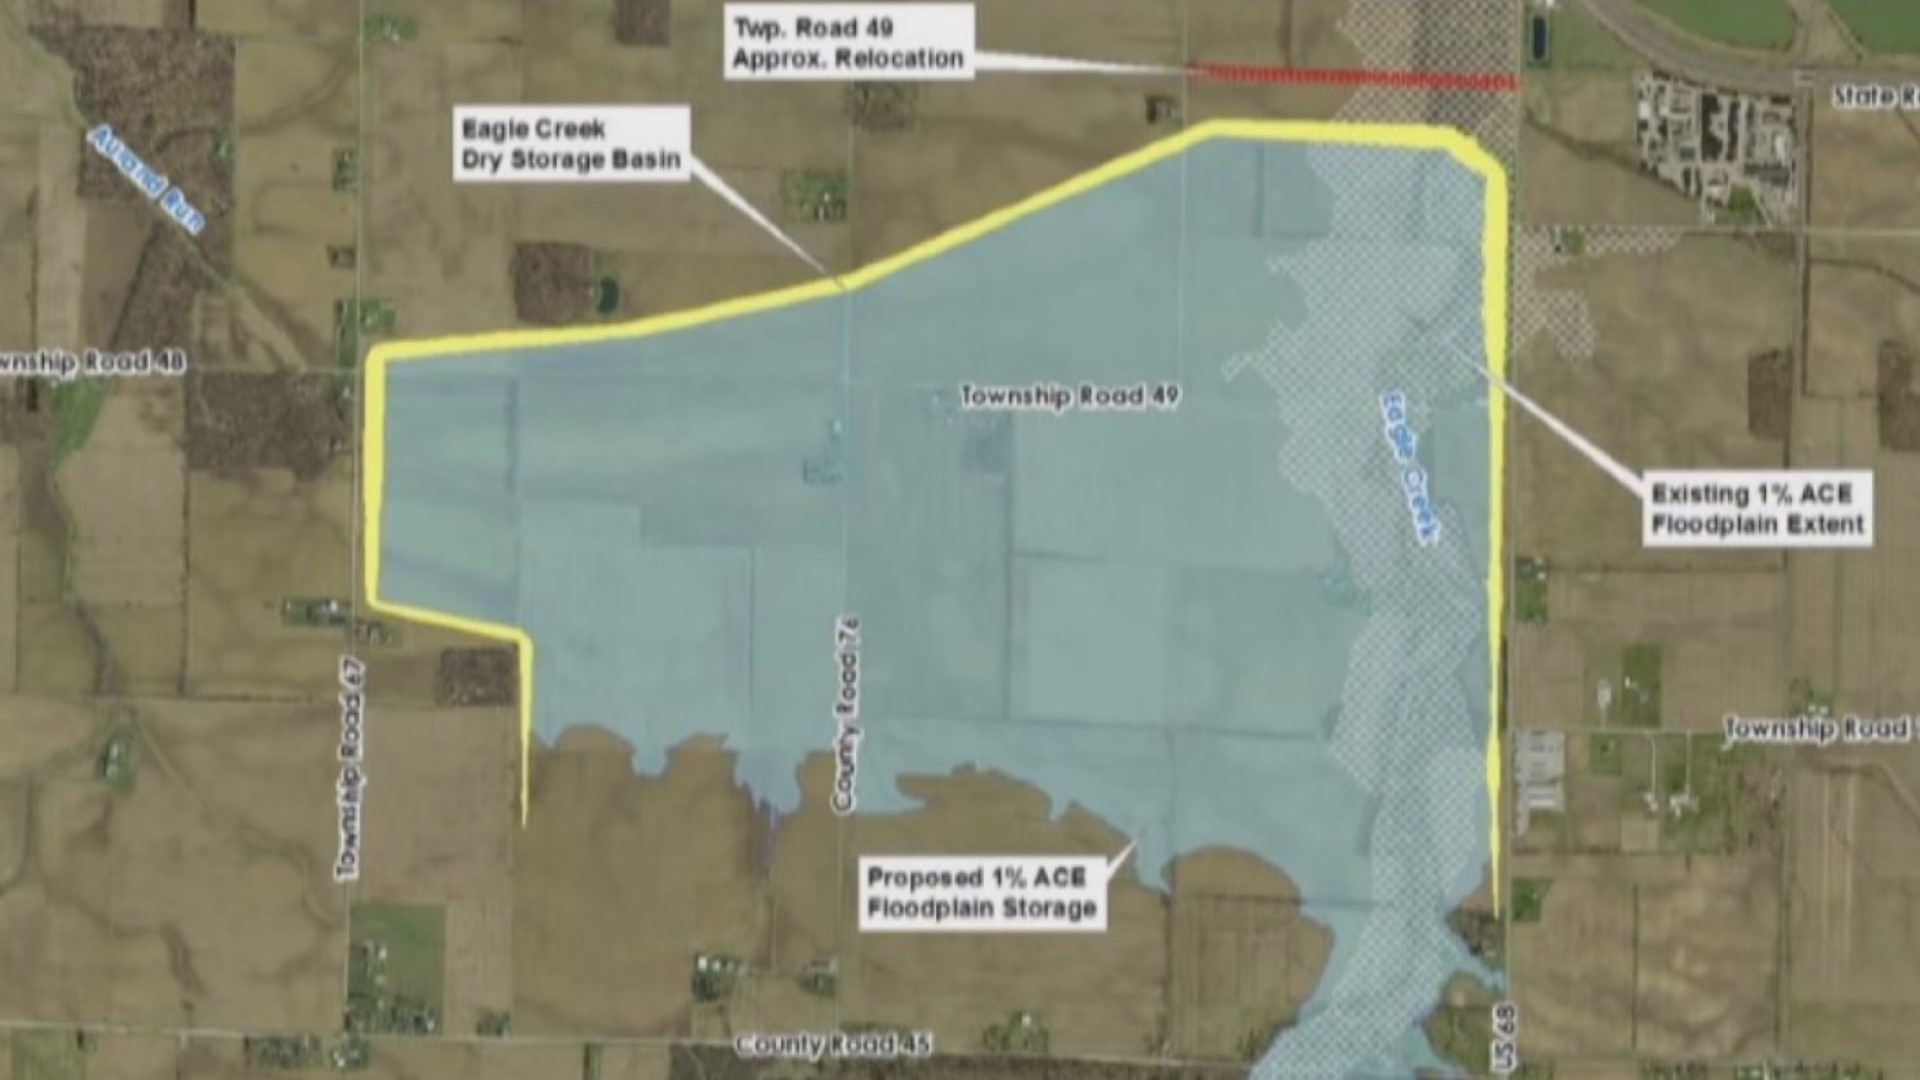 Eagle Creek Floodwater Storage Basin project receives $15M in